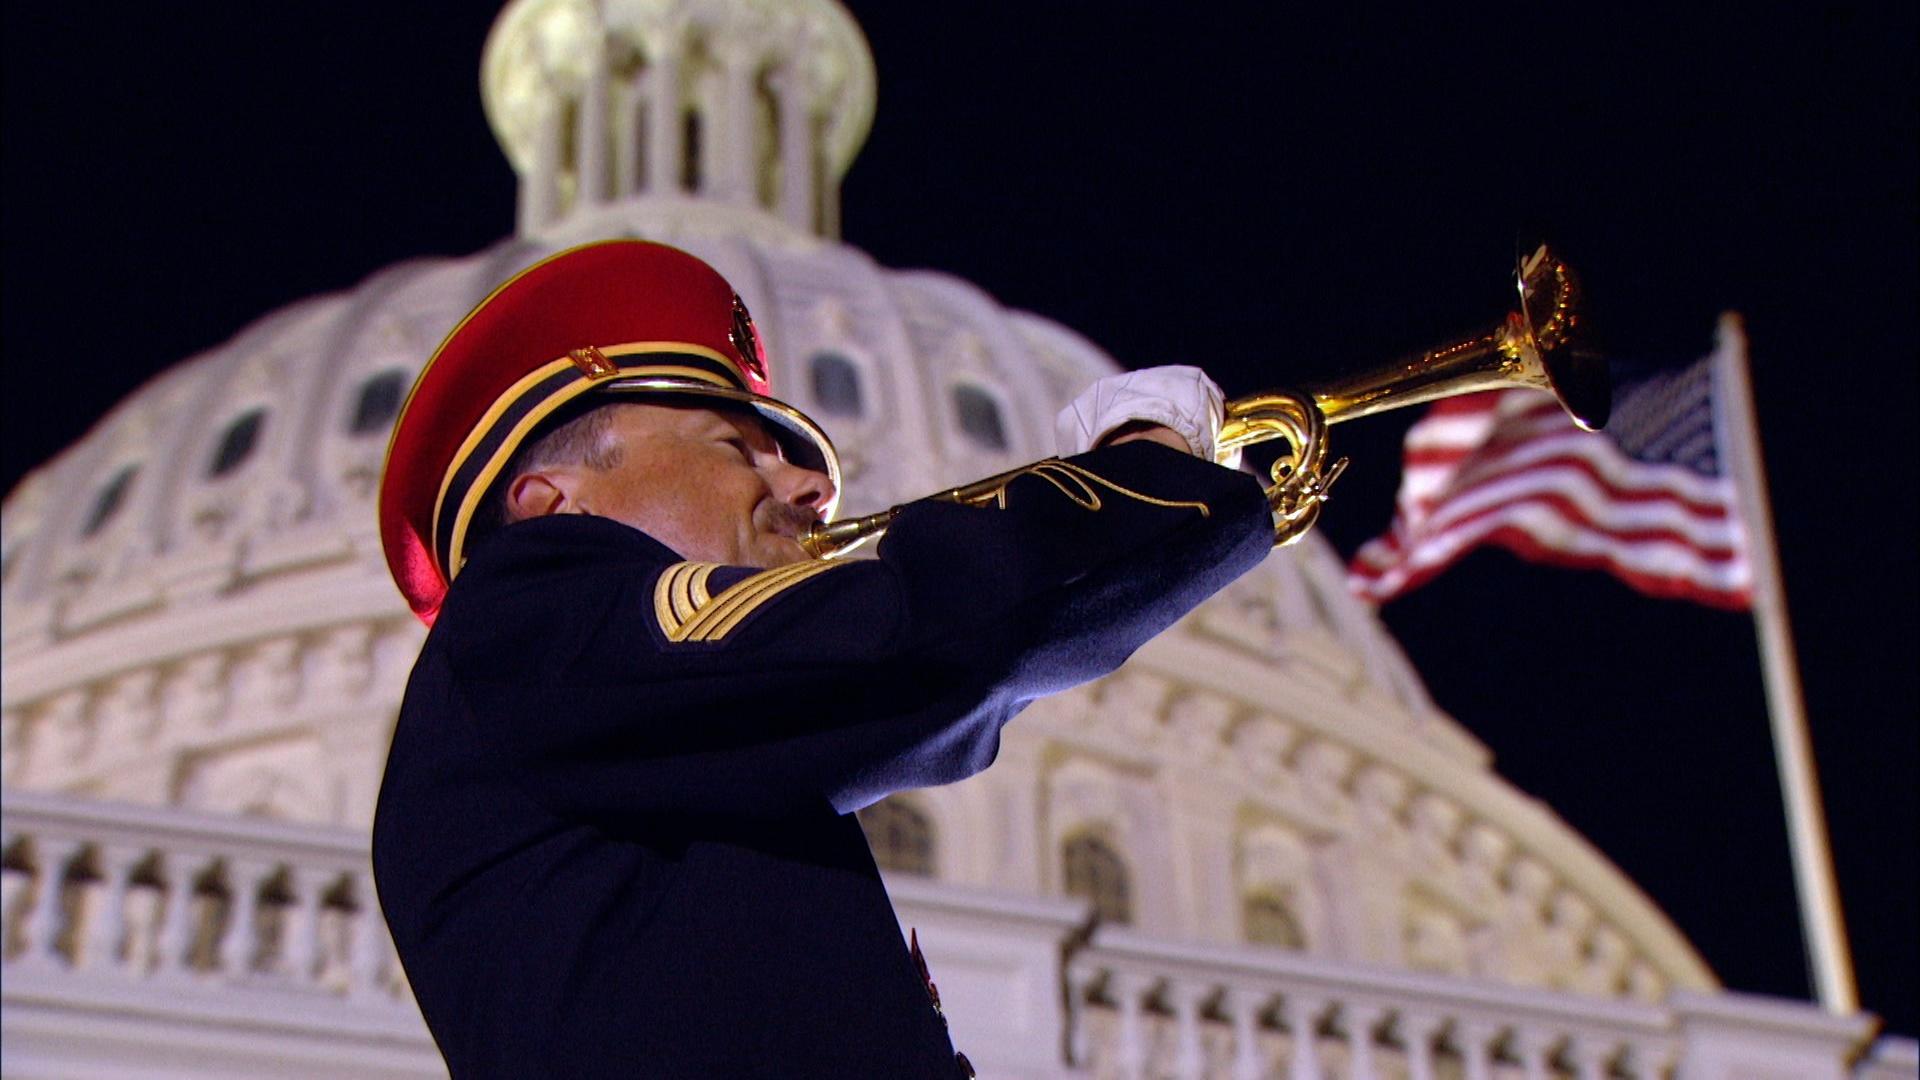 A military band member plays a trumpet with the U.S. Capitol and an American flag flying behind him.